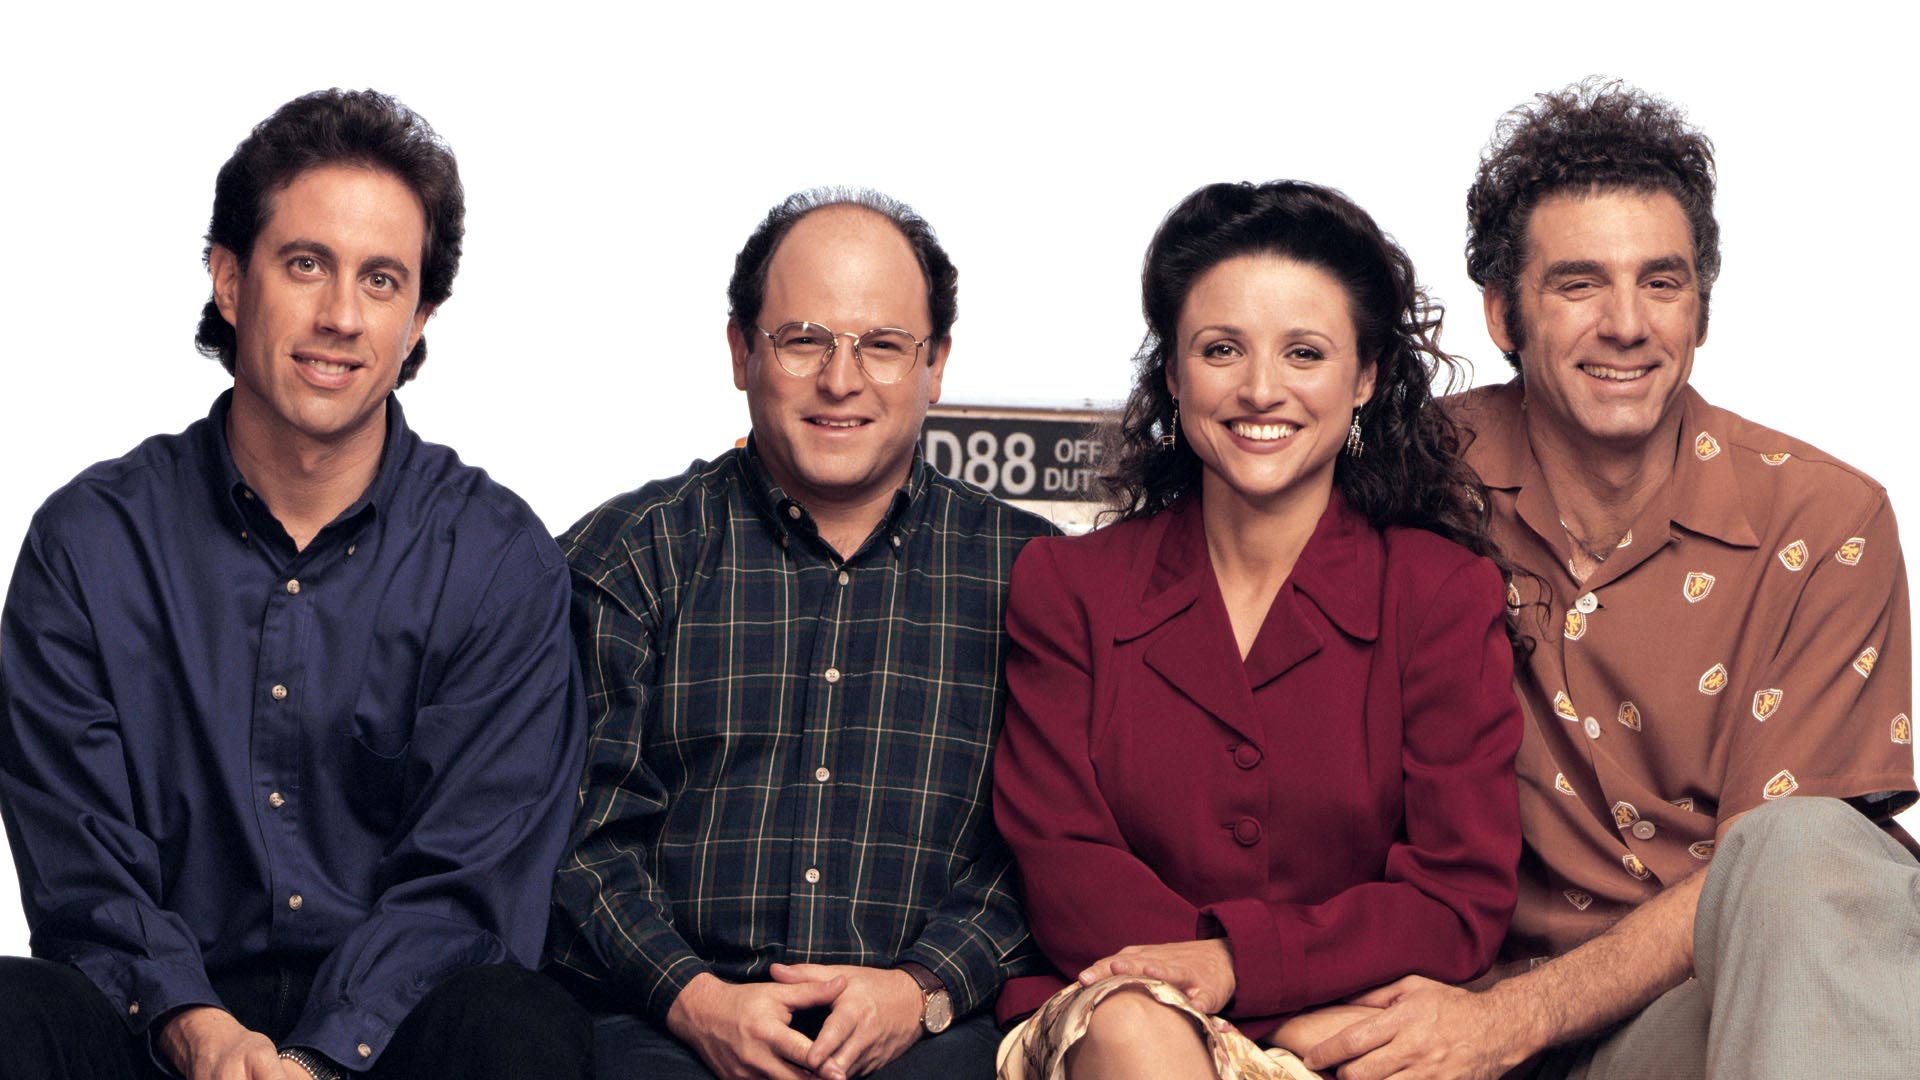 Remove 1 Character from These Famous TV Shows to Find Out What Award You’ll Win Seinfeld